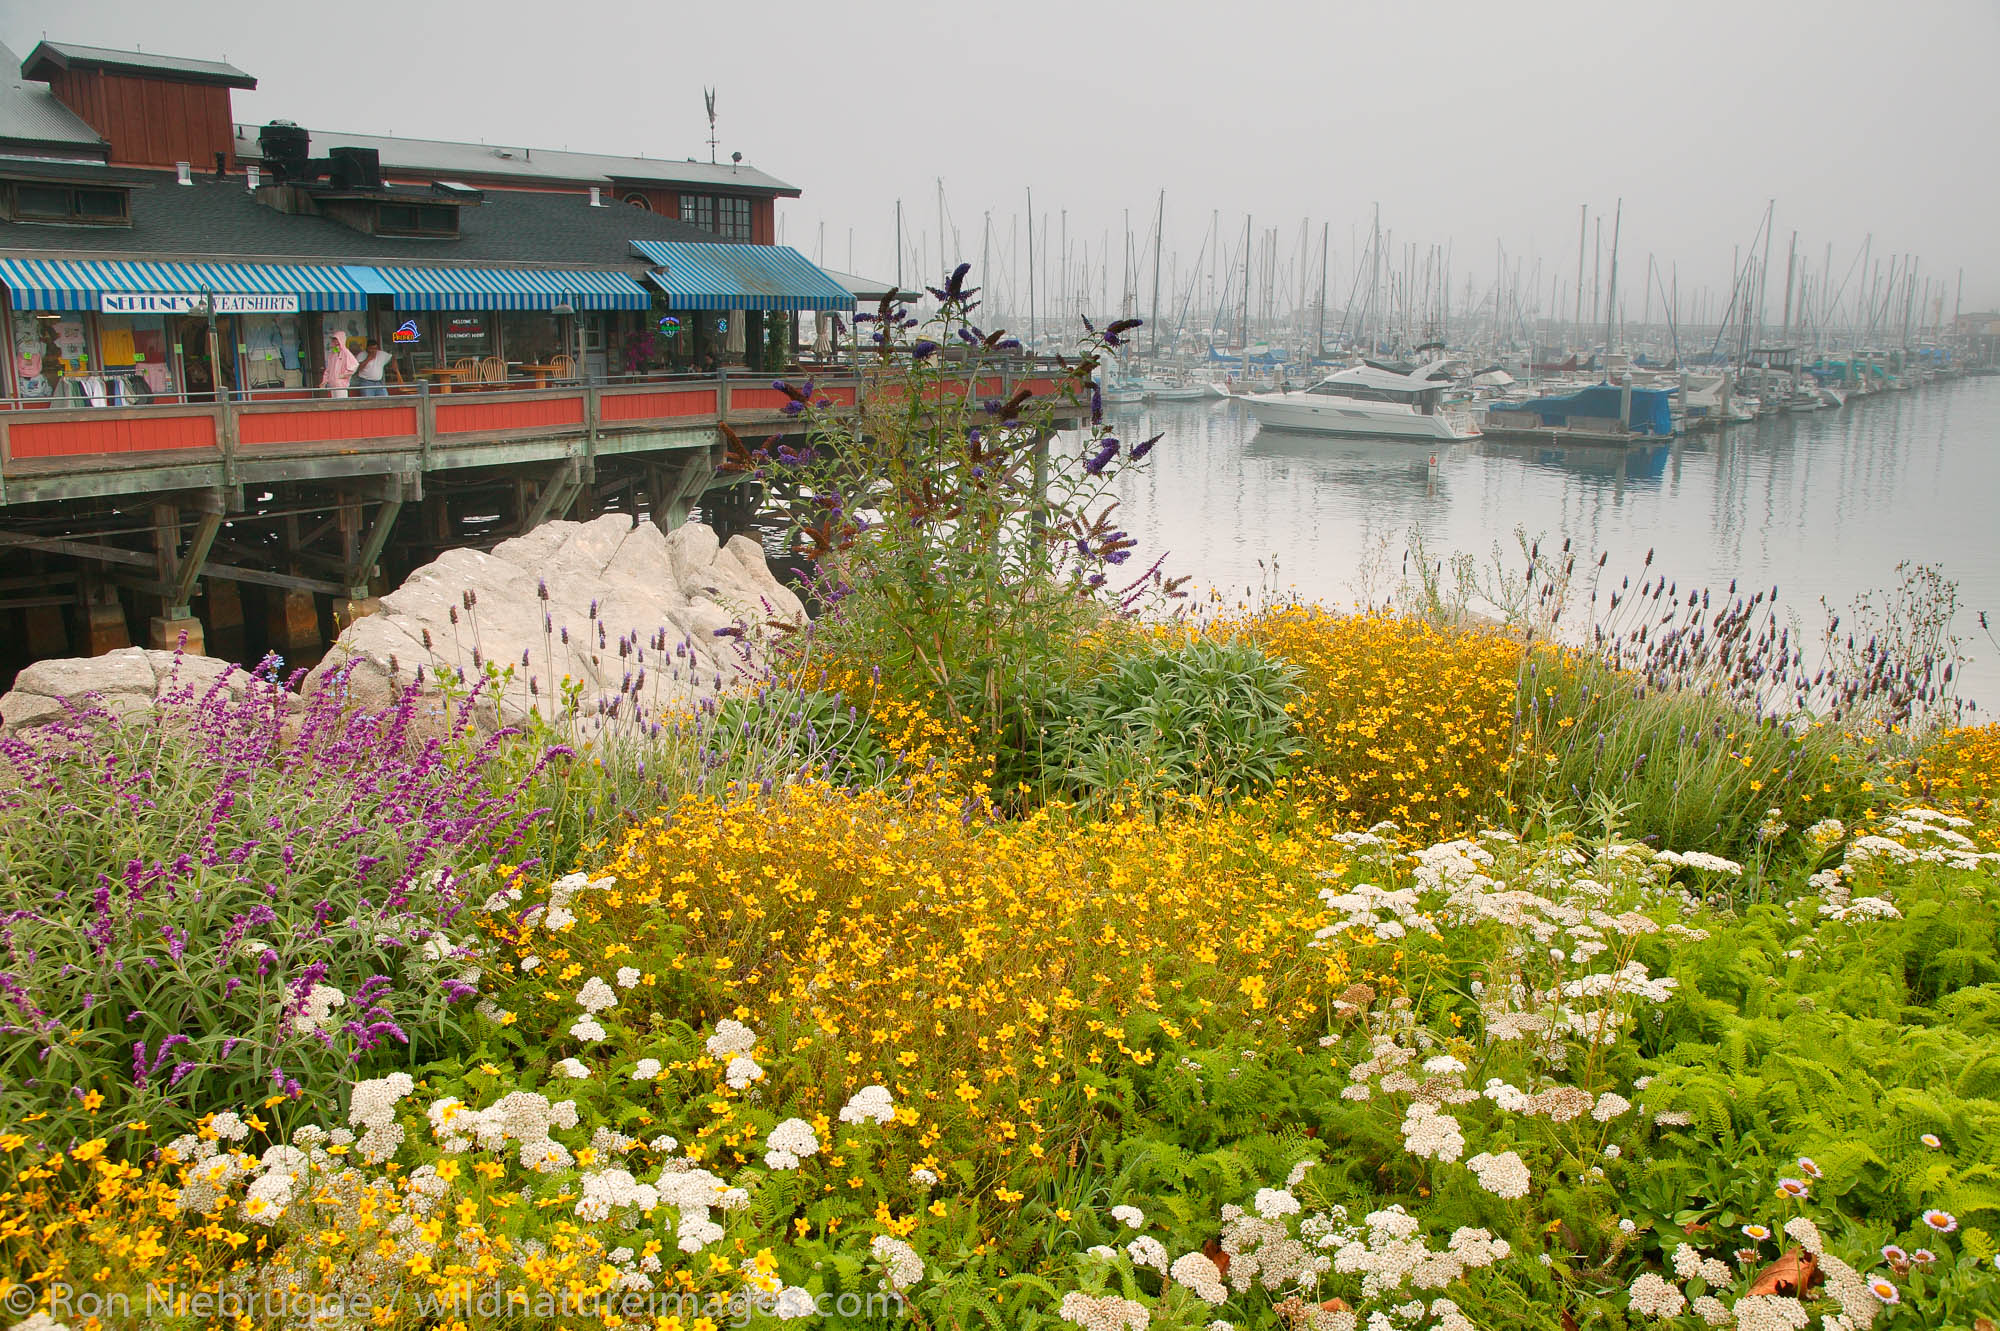 Boats in the Monterey Municipal Marina during a foggy morning, Monterey, California.